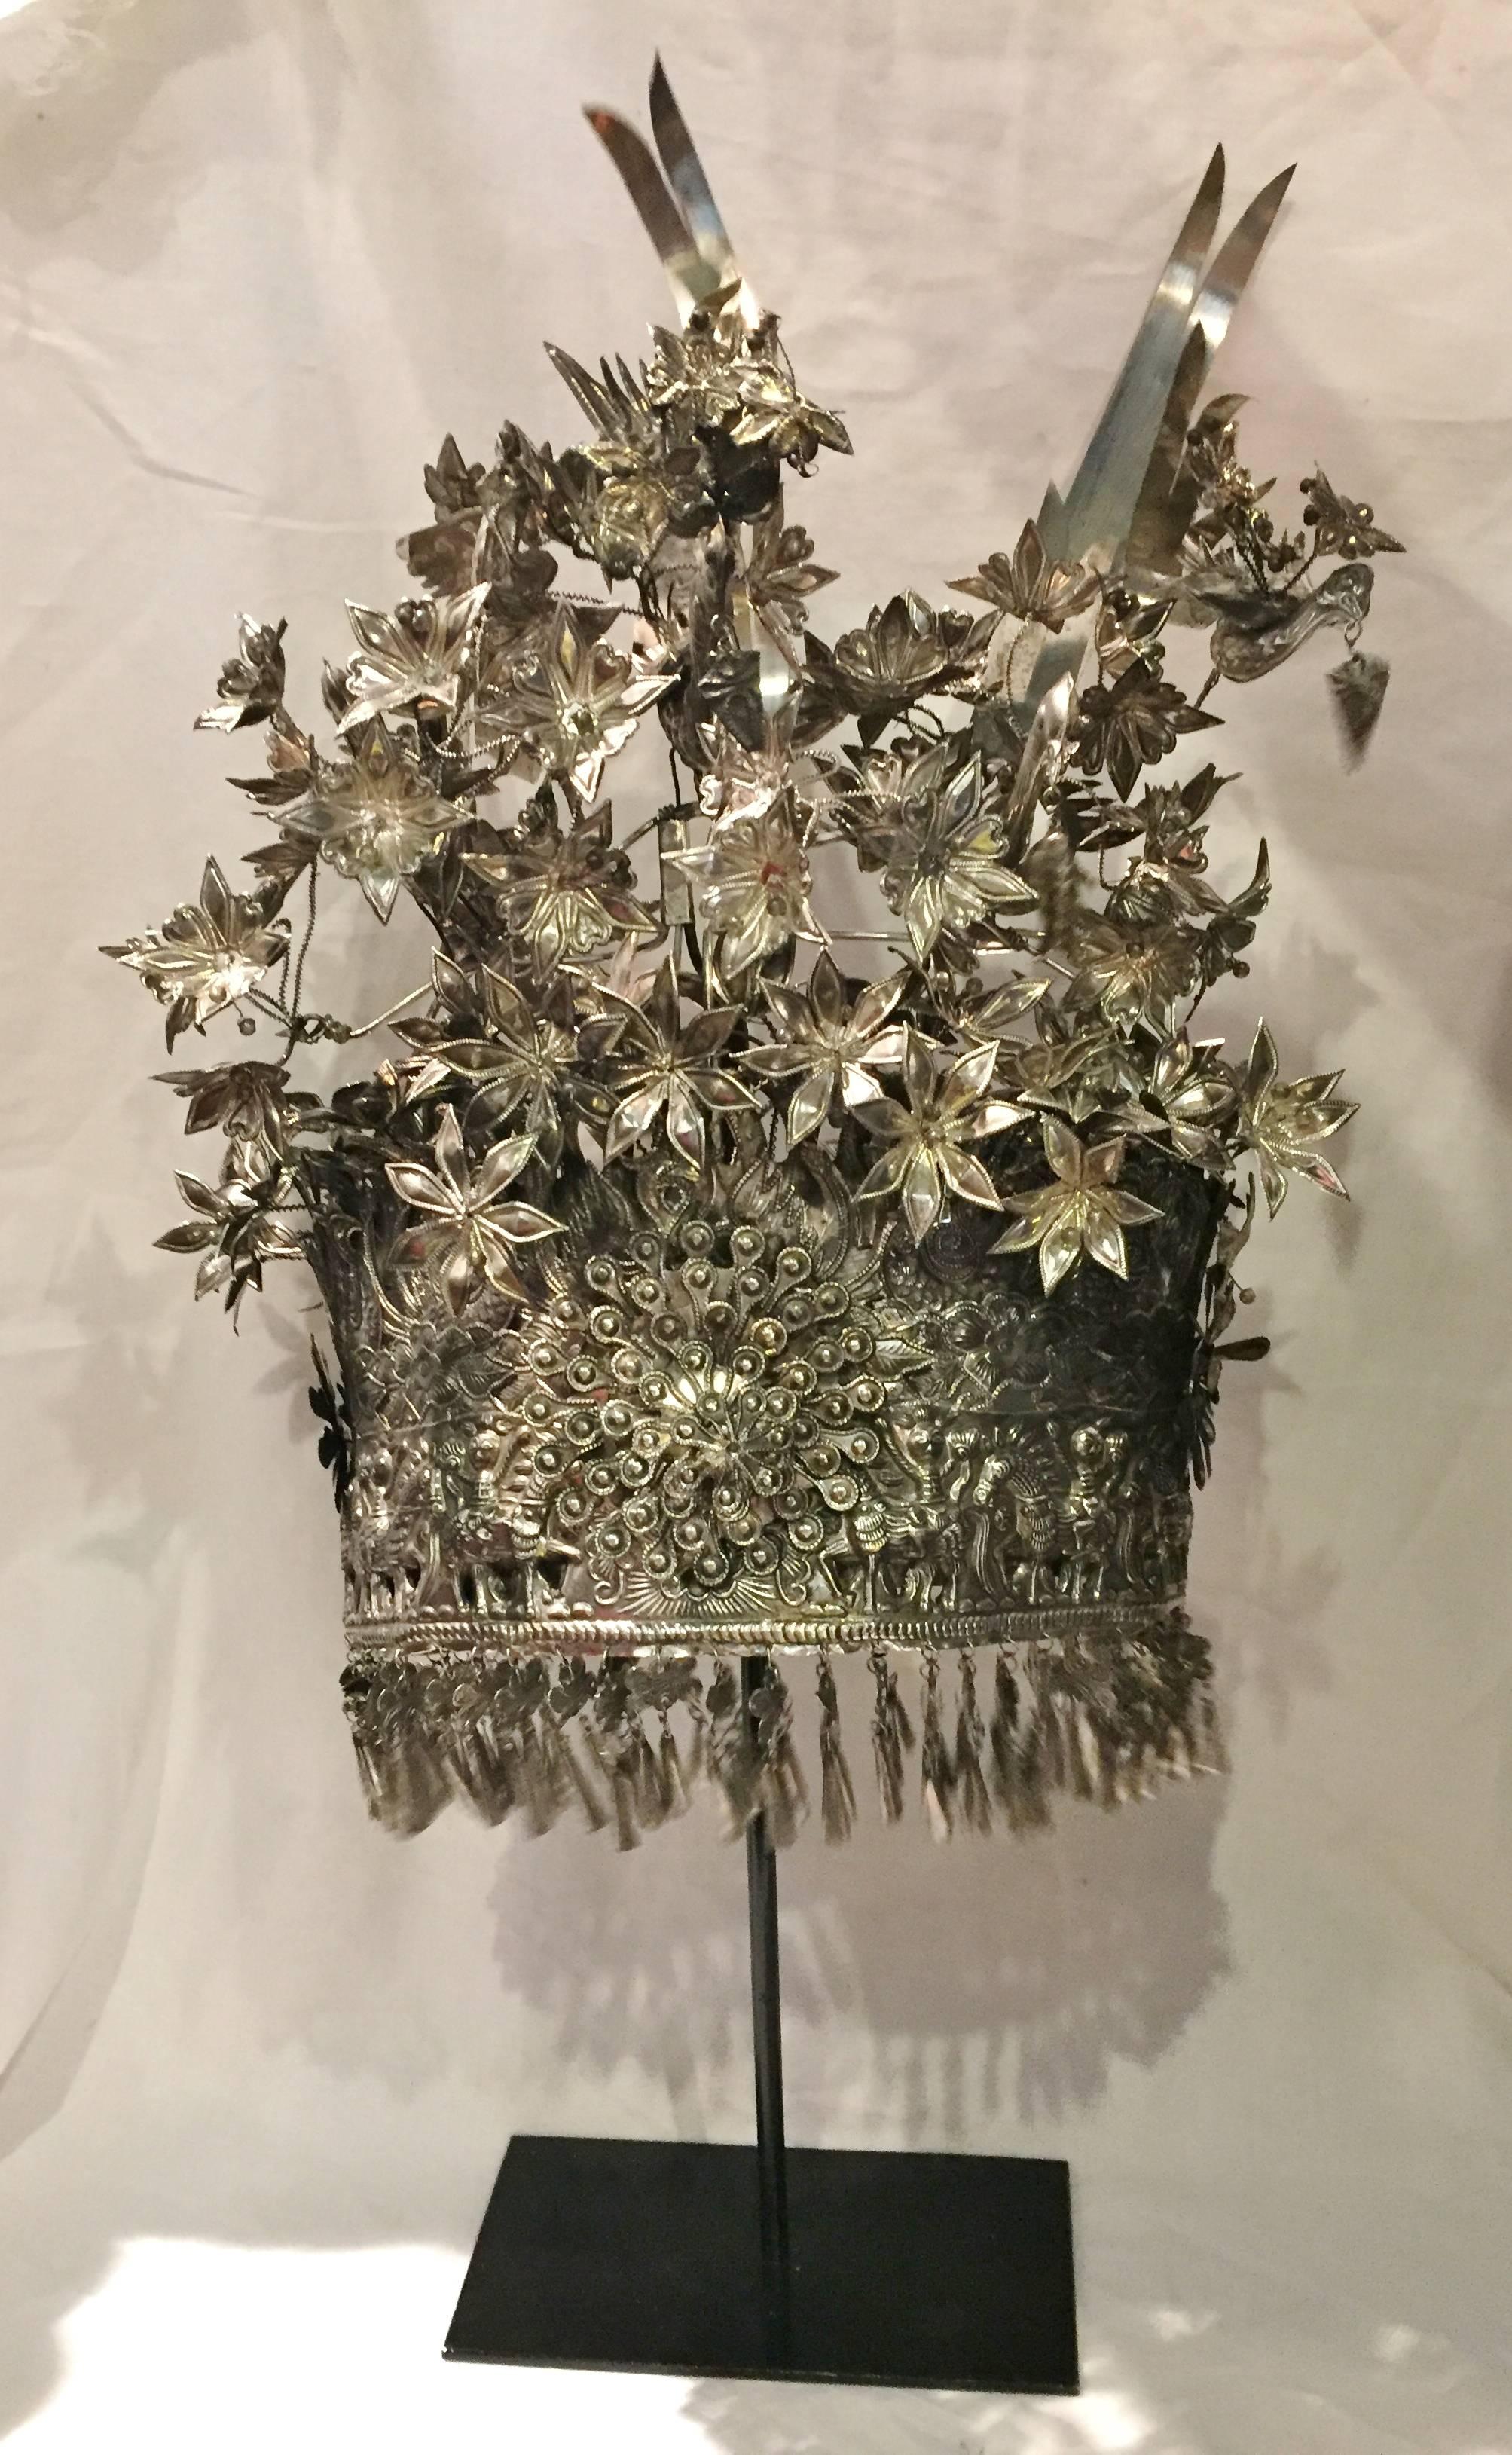 This exquisite crown is a bridal head dress from the Chinese Miao Tribe. Featuring a central medallion of a five-layer peony, the crown is elaborately decorated with over 60 lilies. They symbolize marital bliss. Other important motifs are phoenixes,